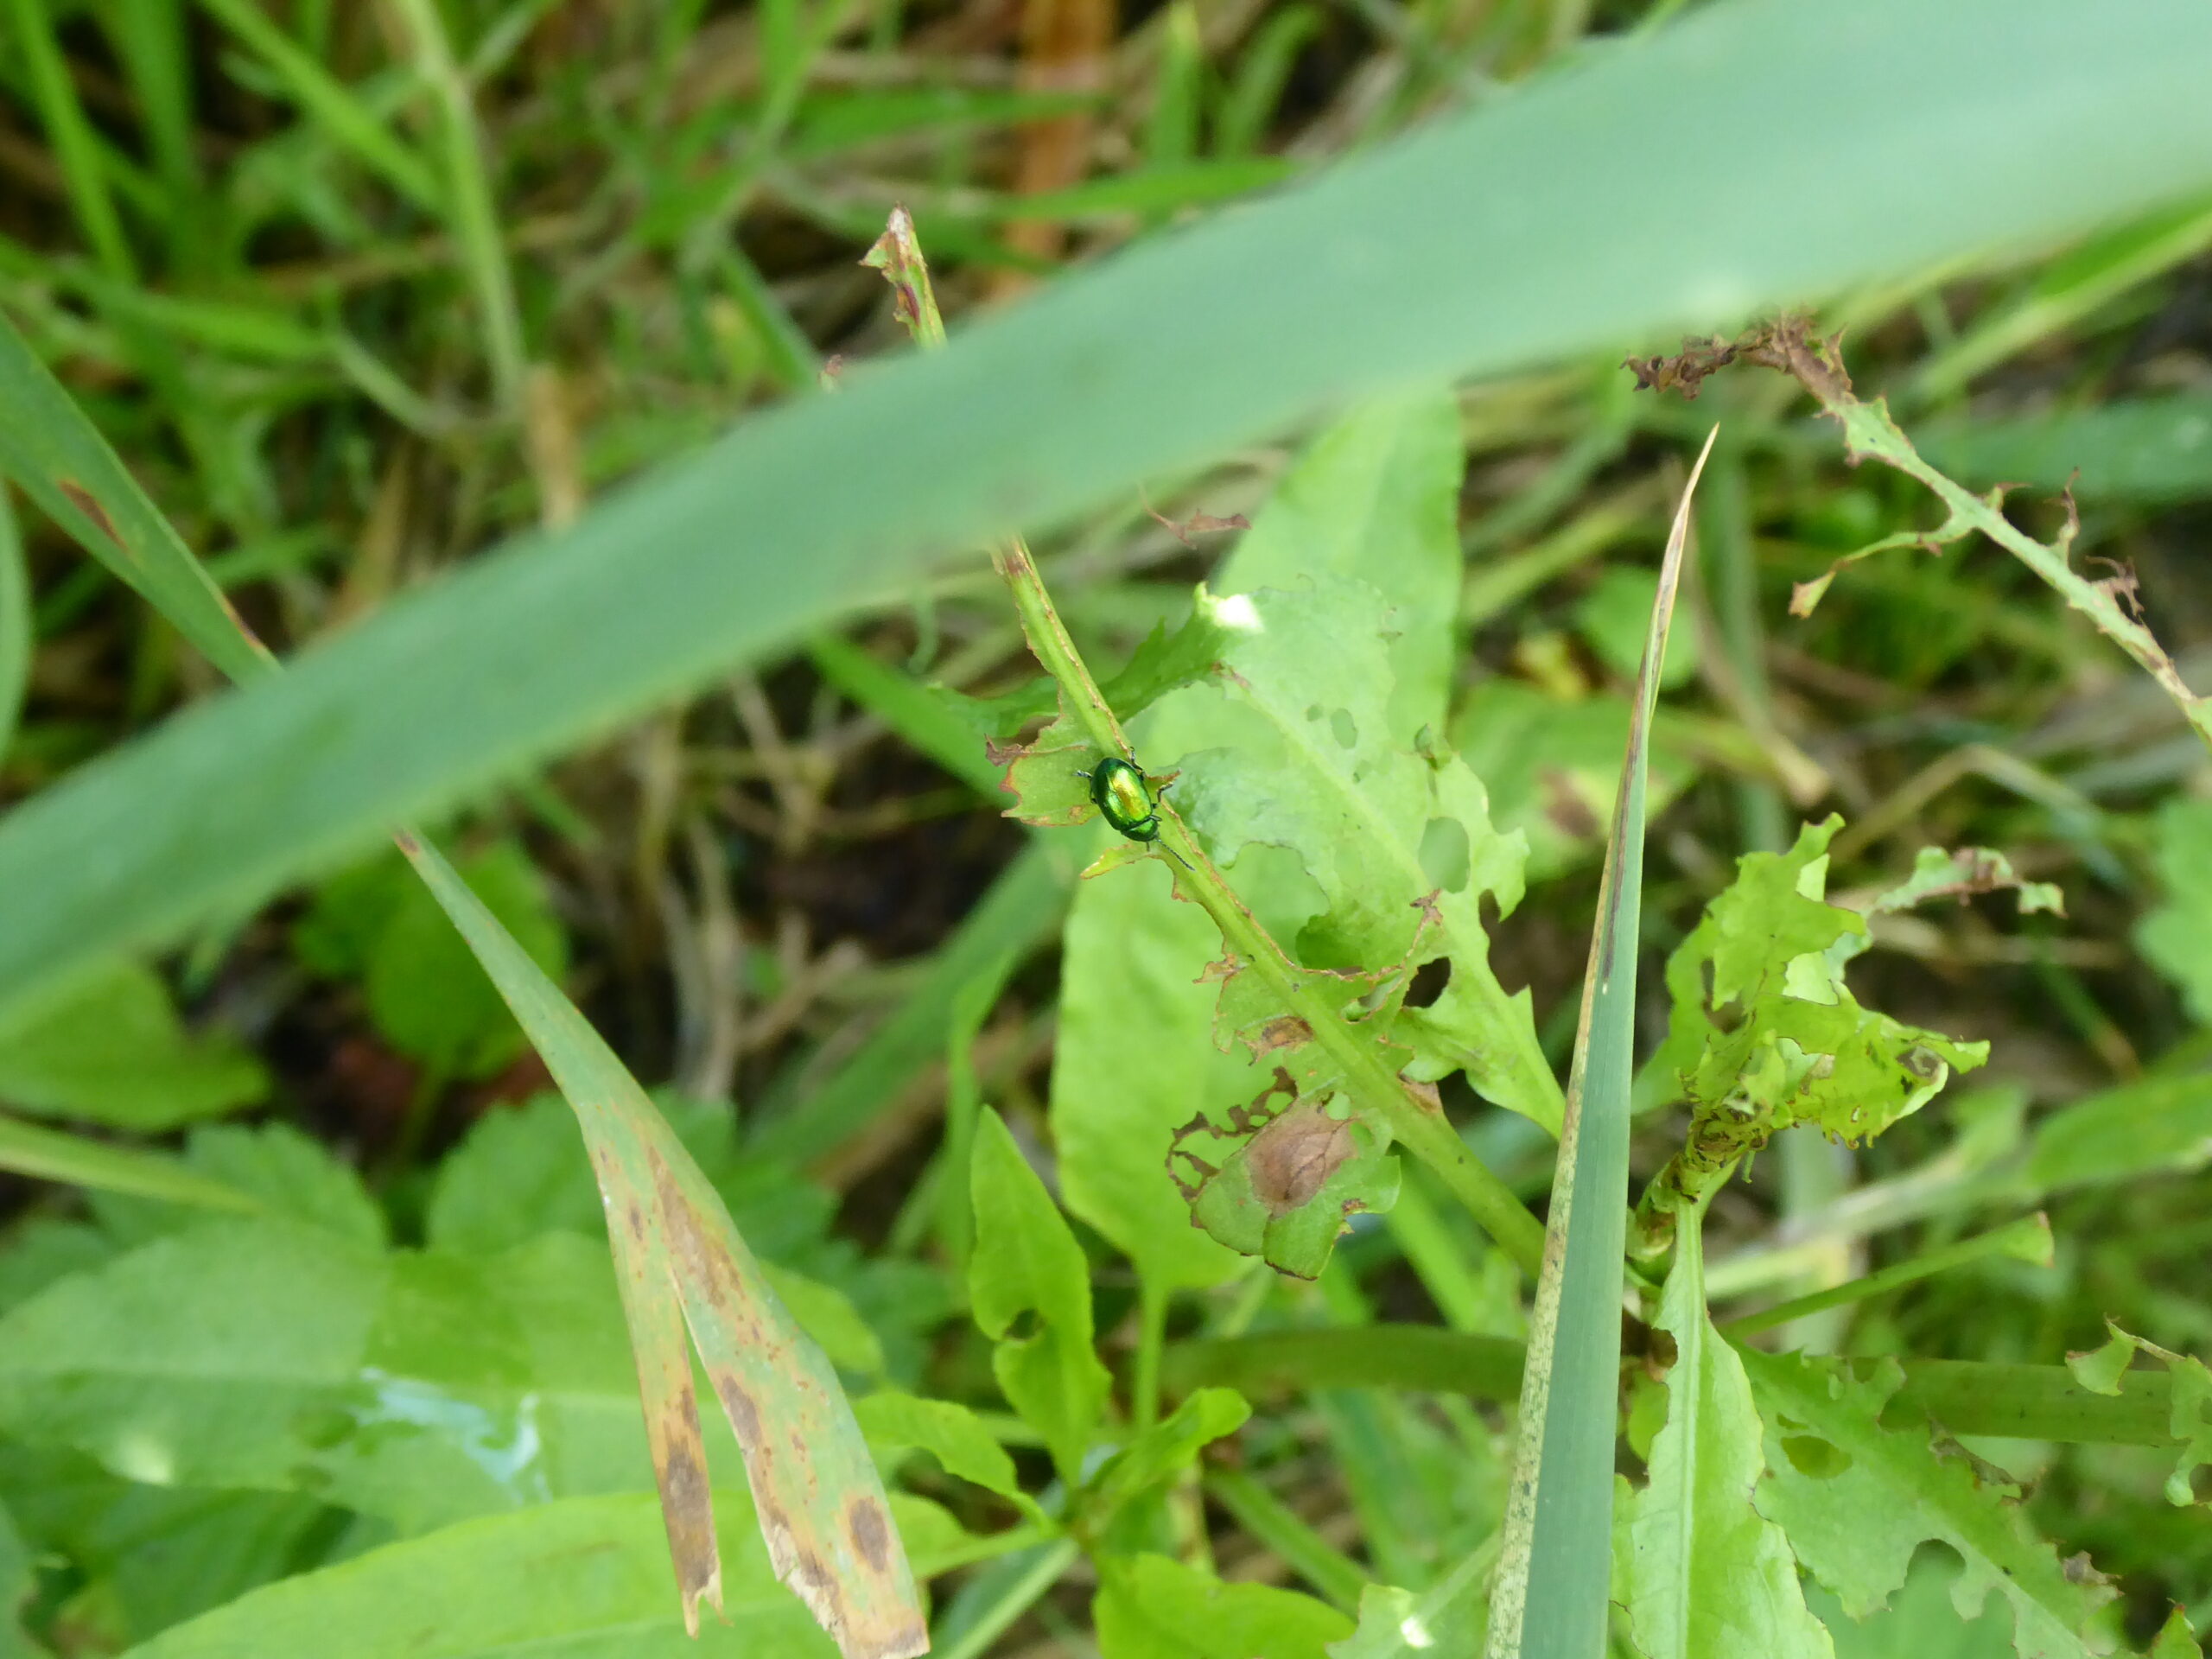 Common Green Bottle and Green Dock Beetle